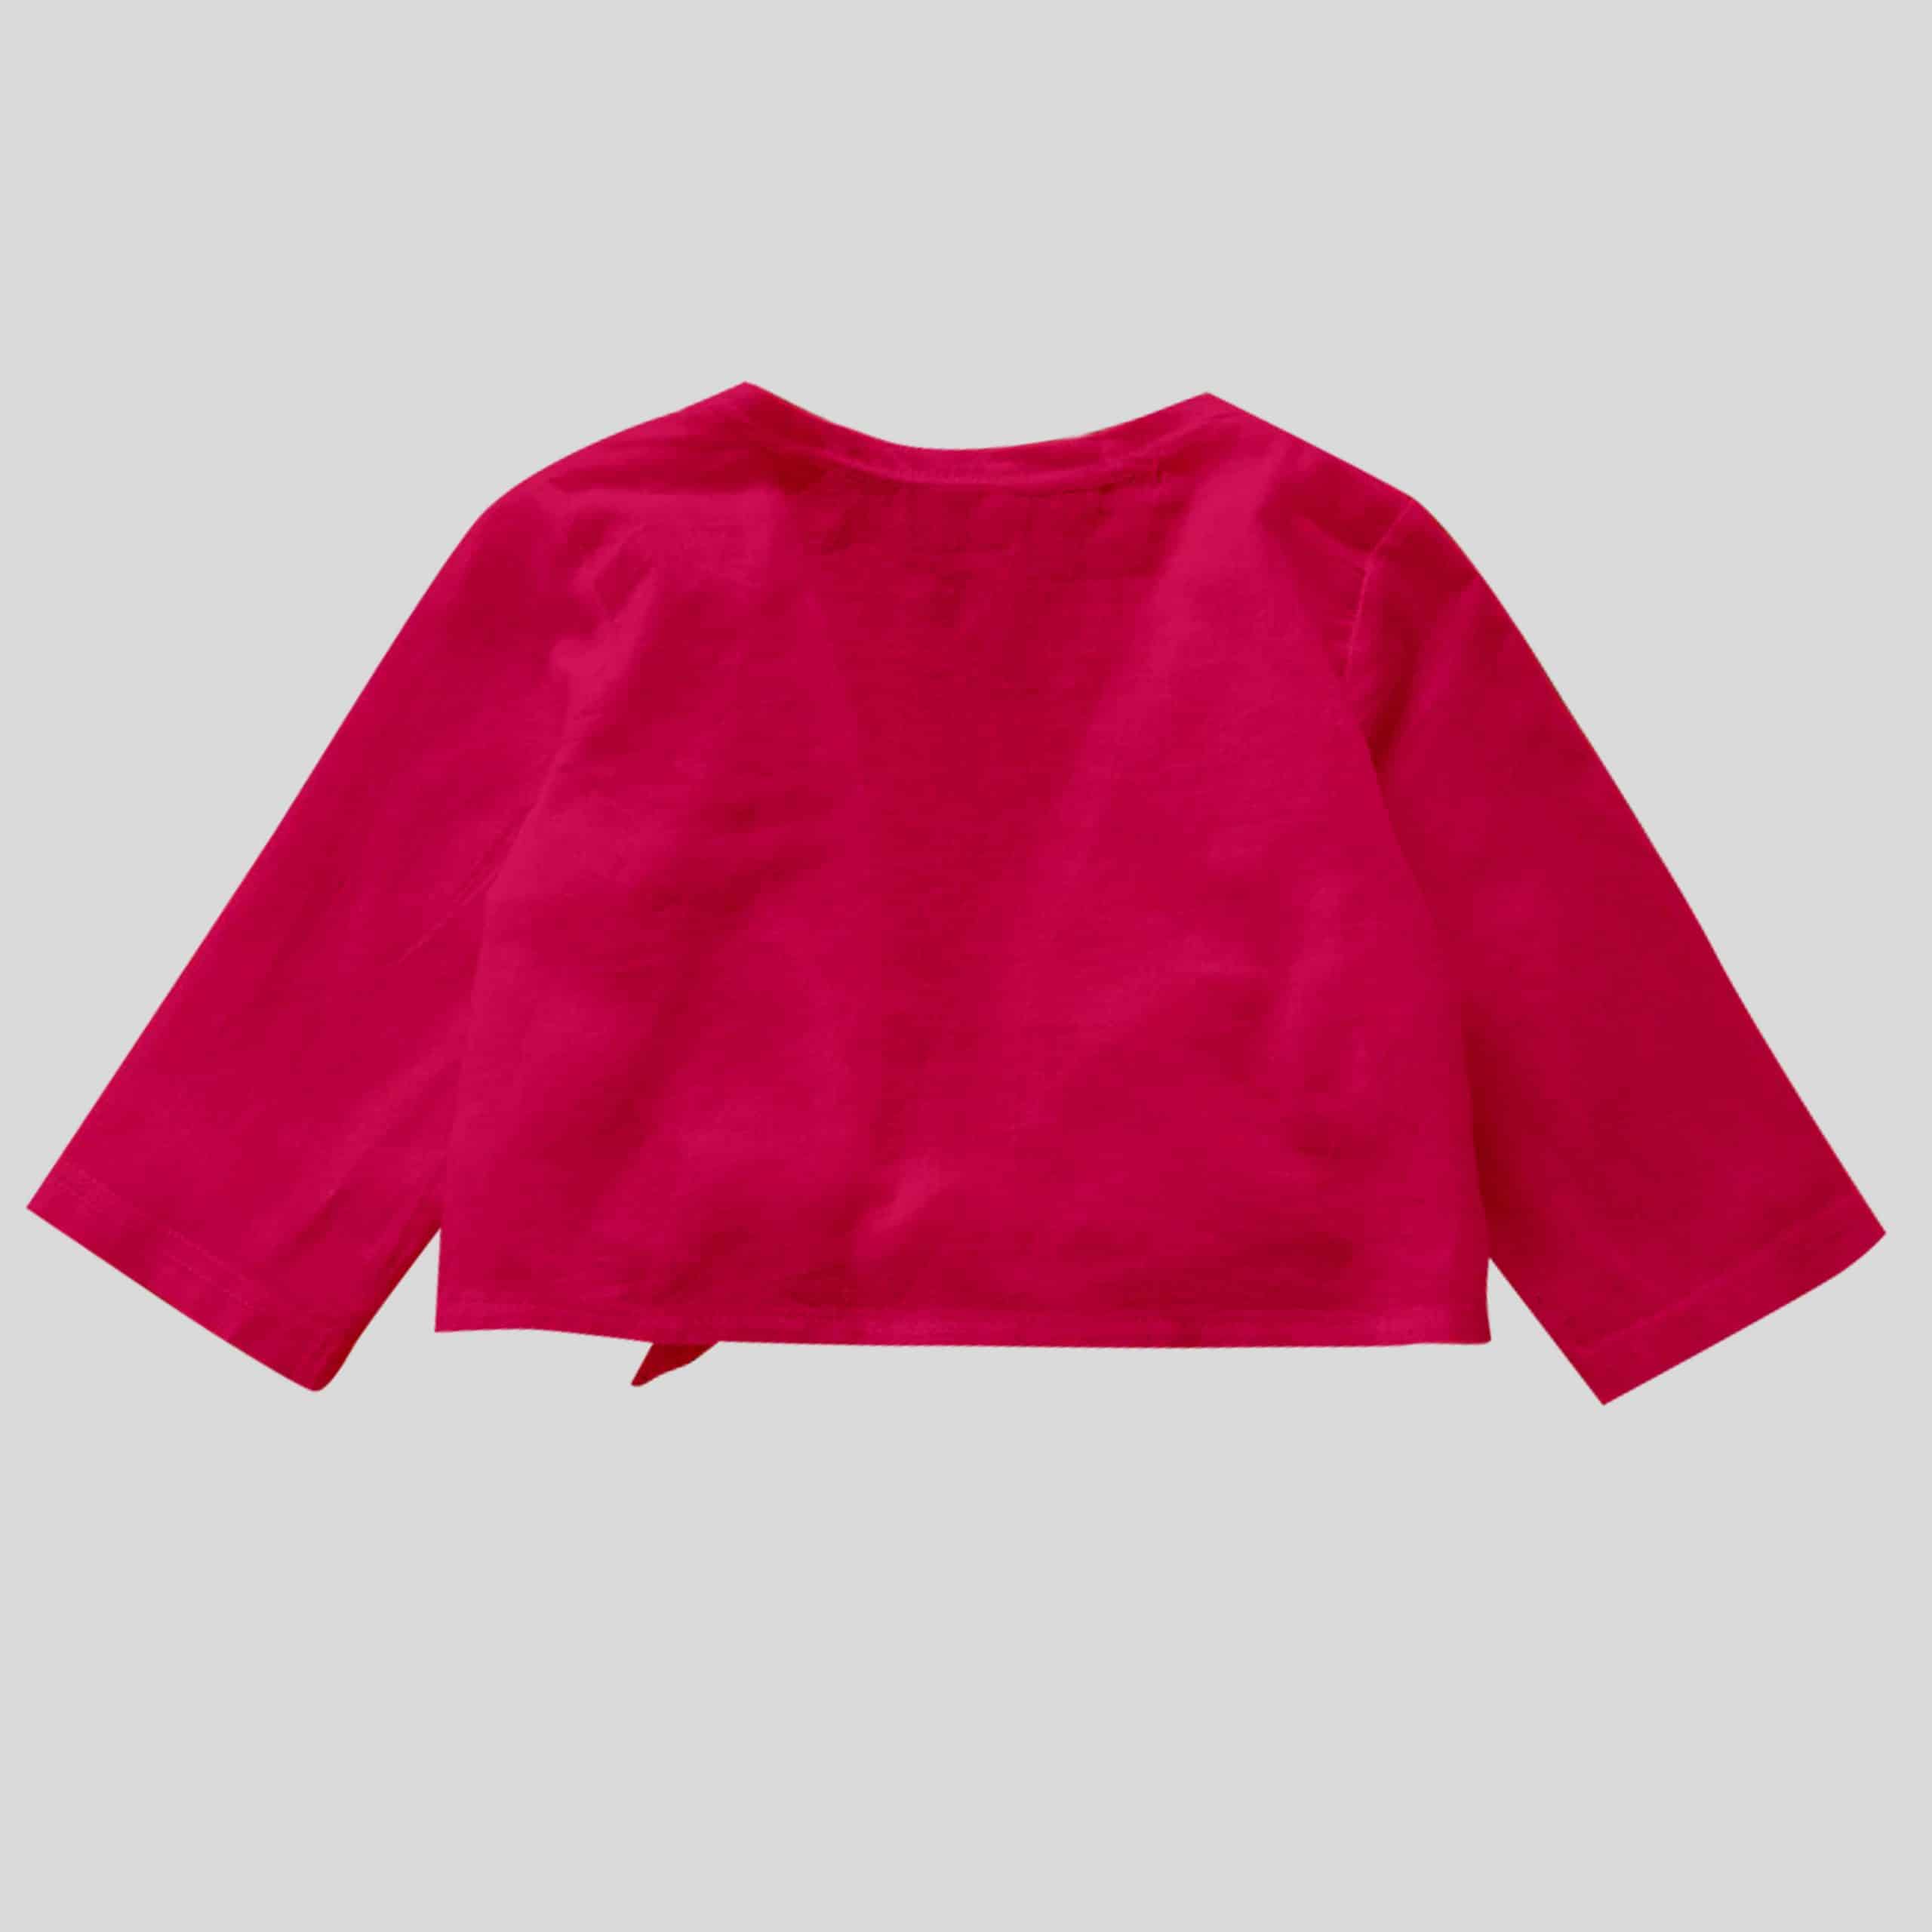 Girls hot pink jacket with typeable knot - RKFCW164